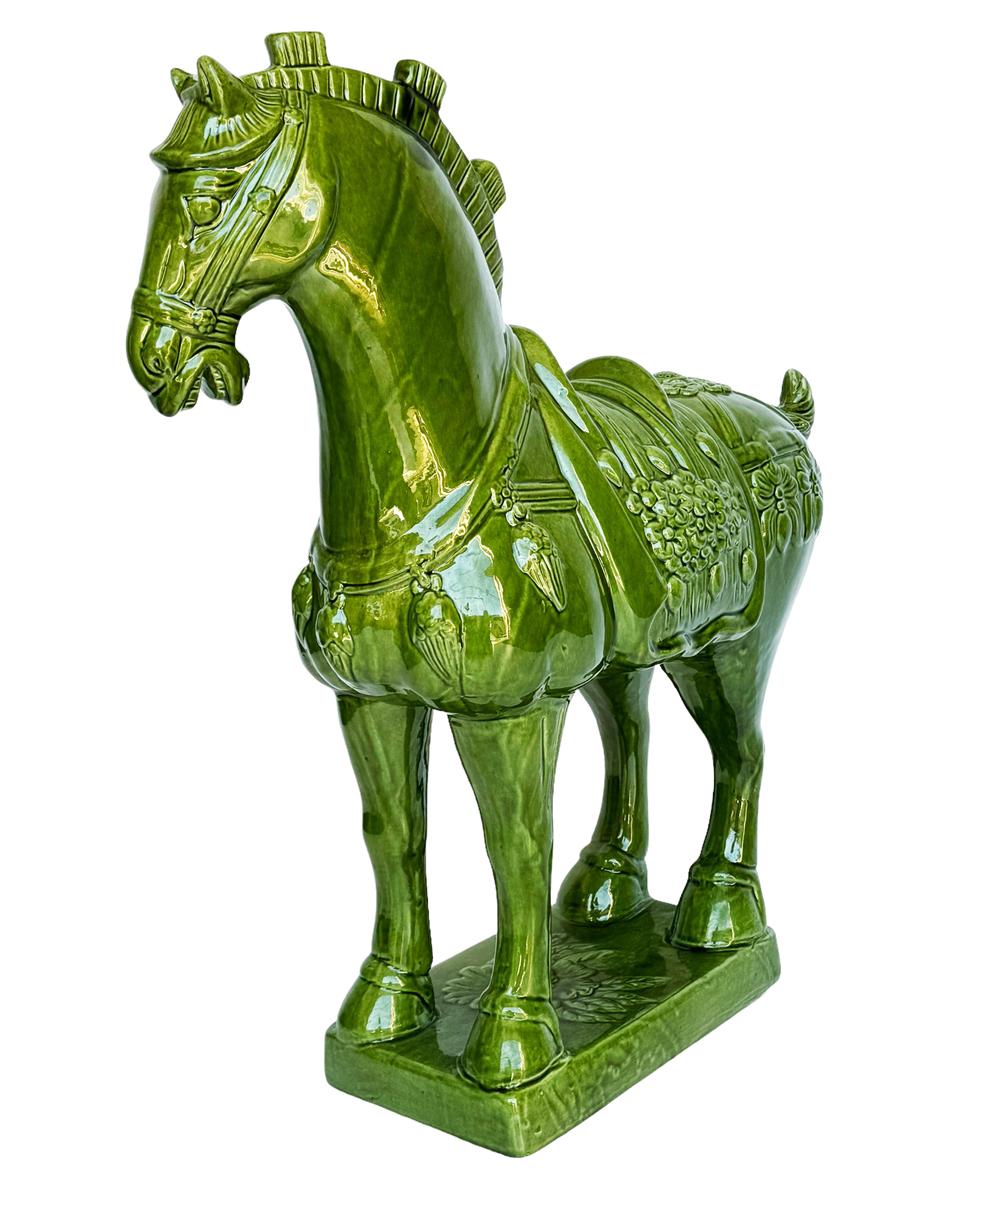 Large Mid-Century Italian Modern Green Ceramic Horse Pottery Sculpture or Statue For Sale 1